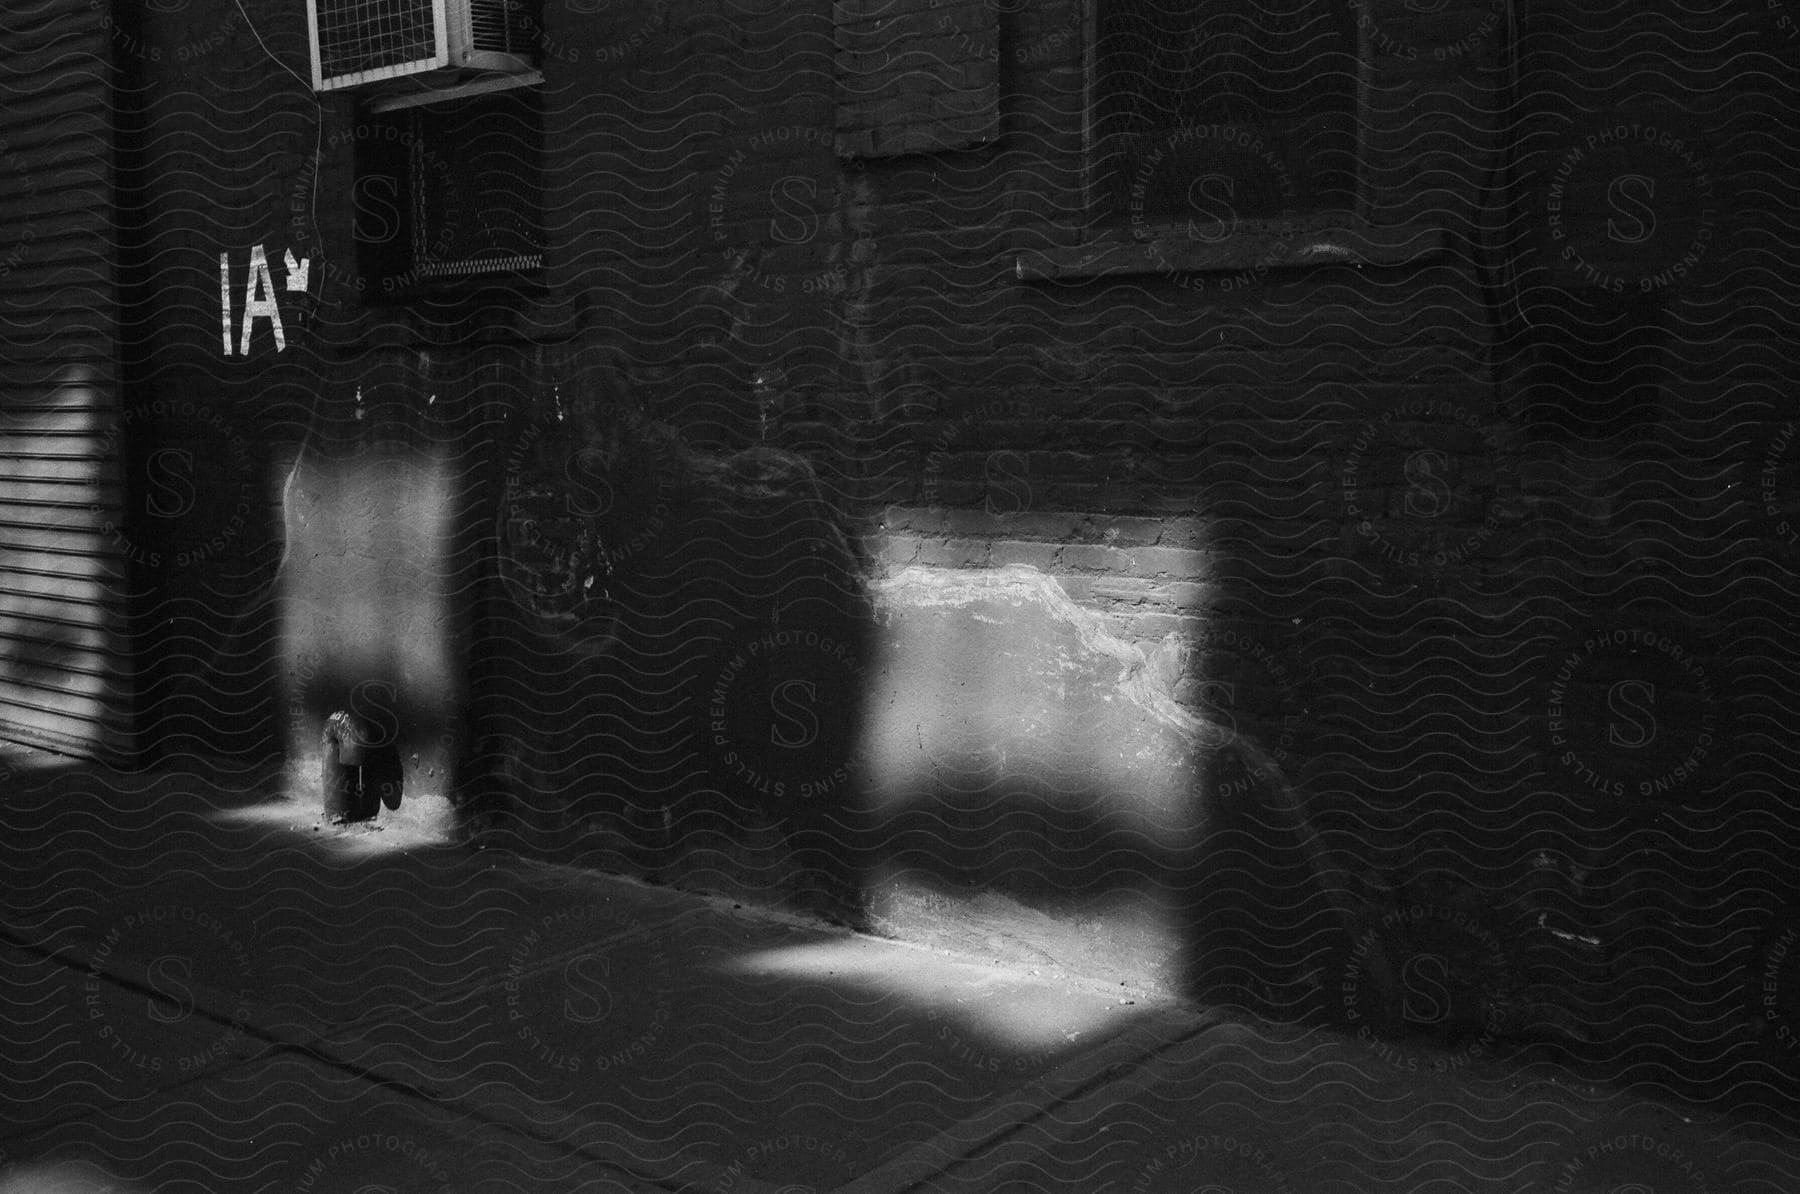 Sunlight shaped as windows projected on a brick apartment building in new york city